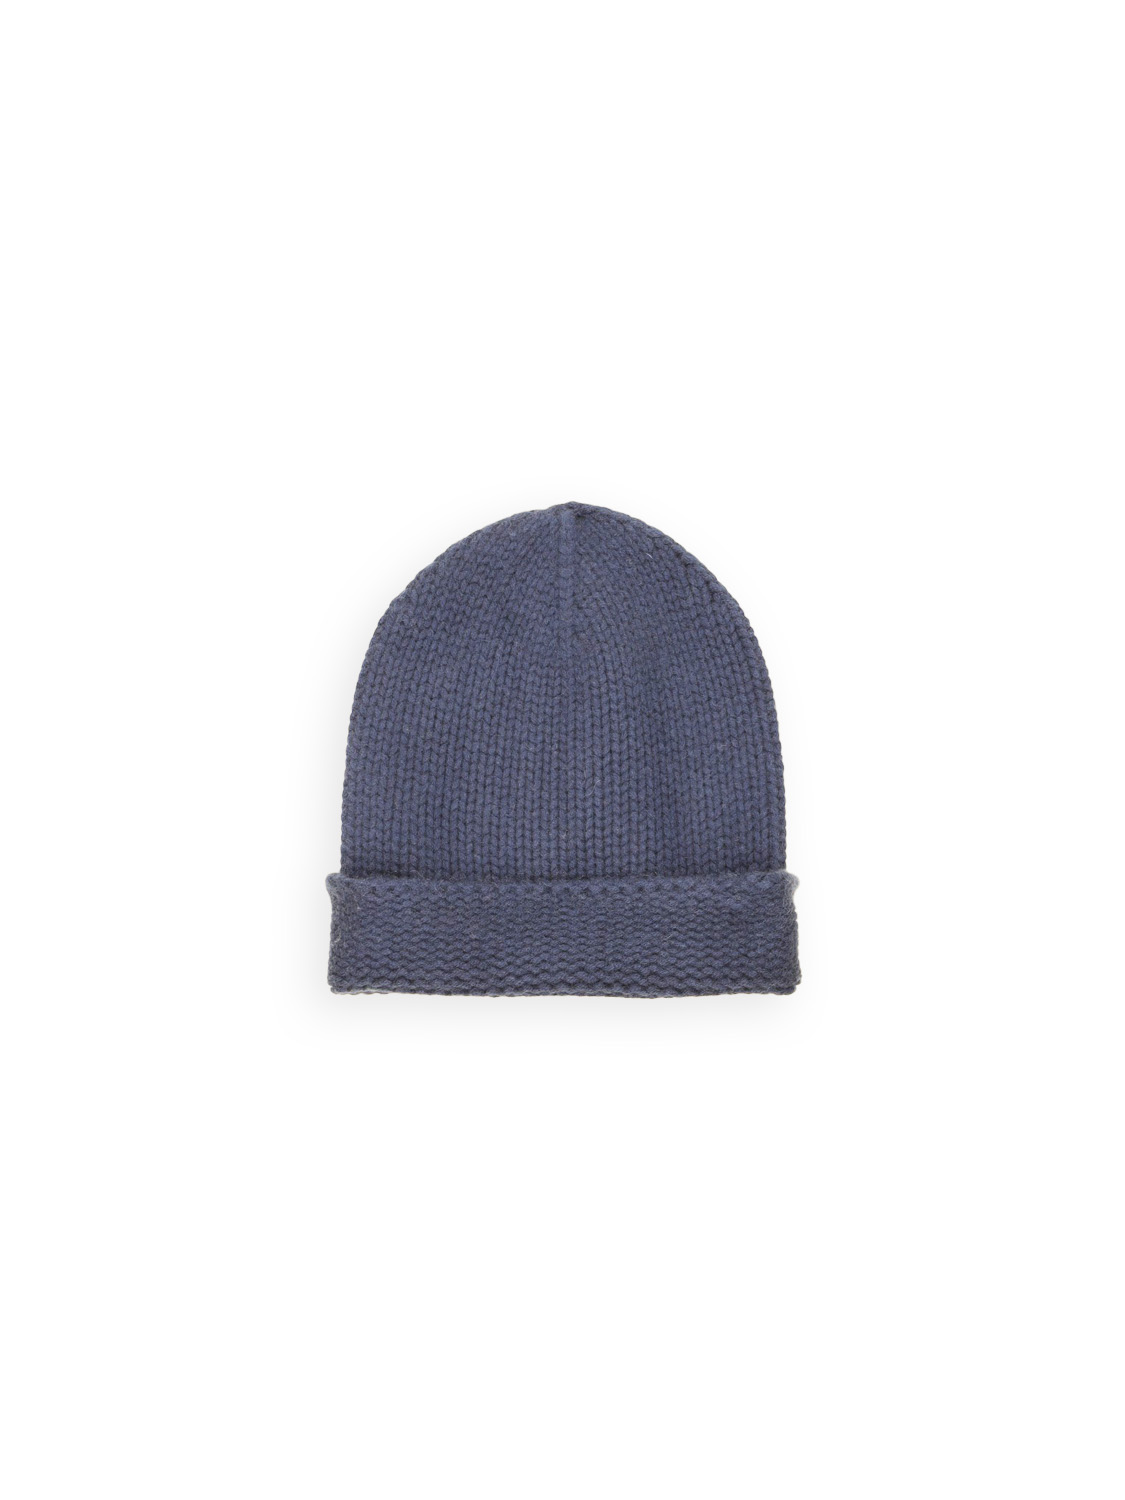 friendly hunting Cap - knitted cashmere cap  navy One Size